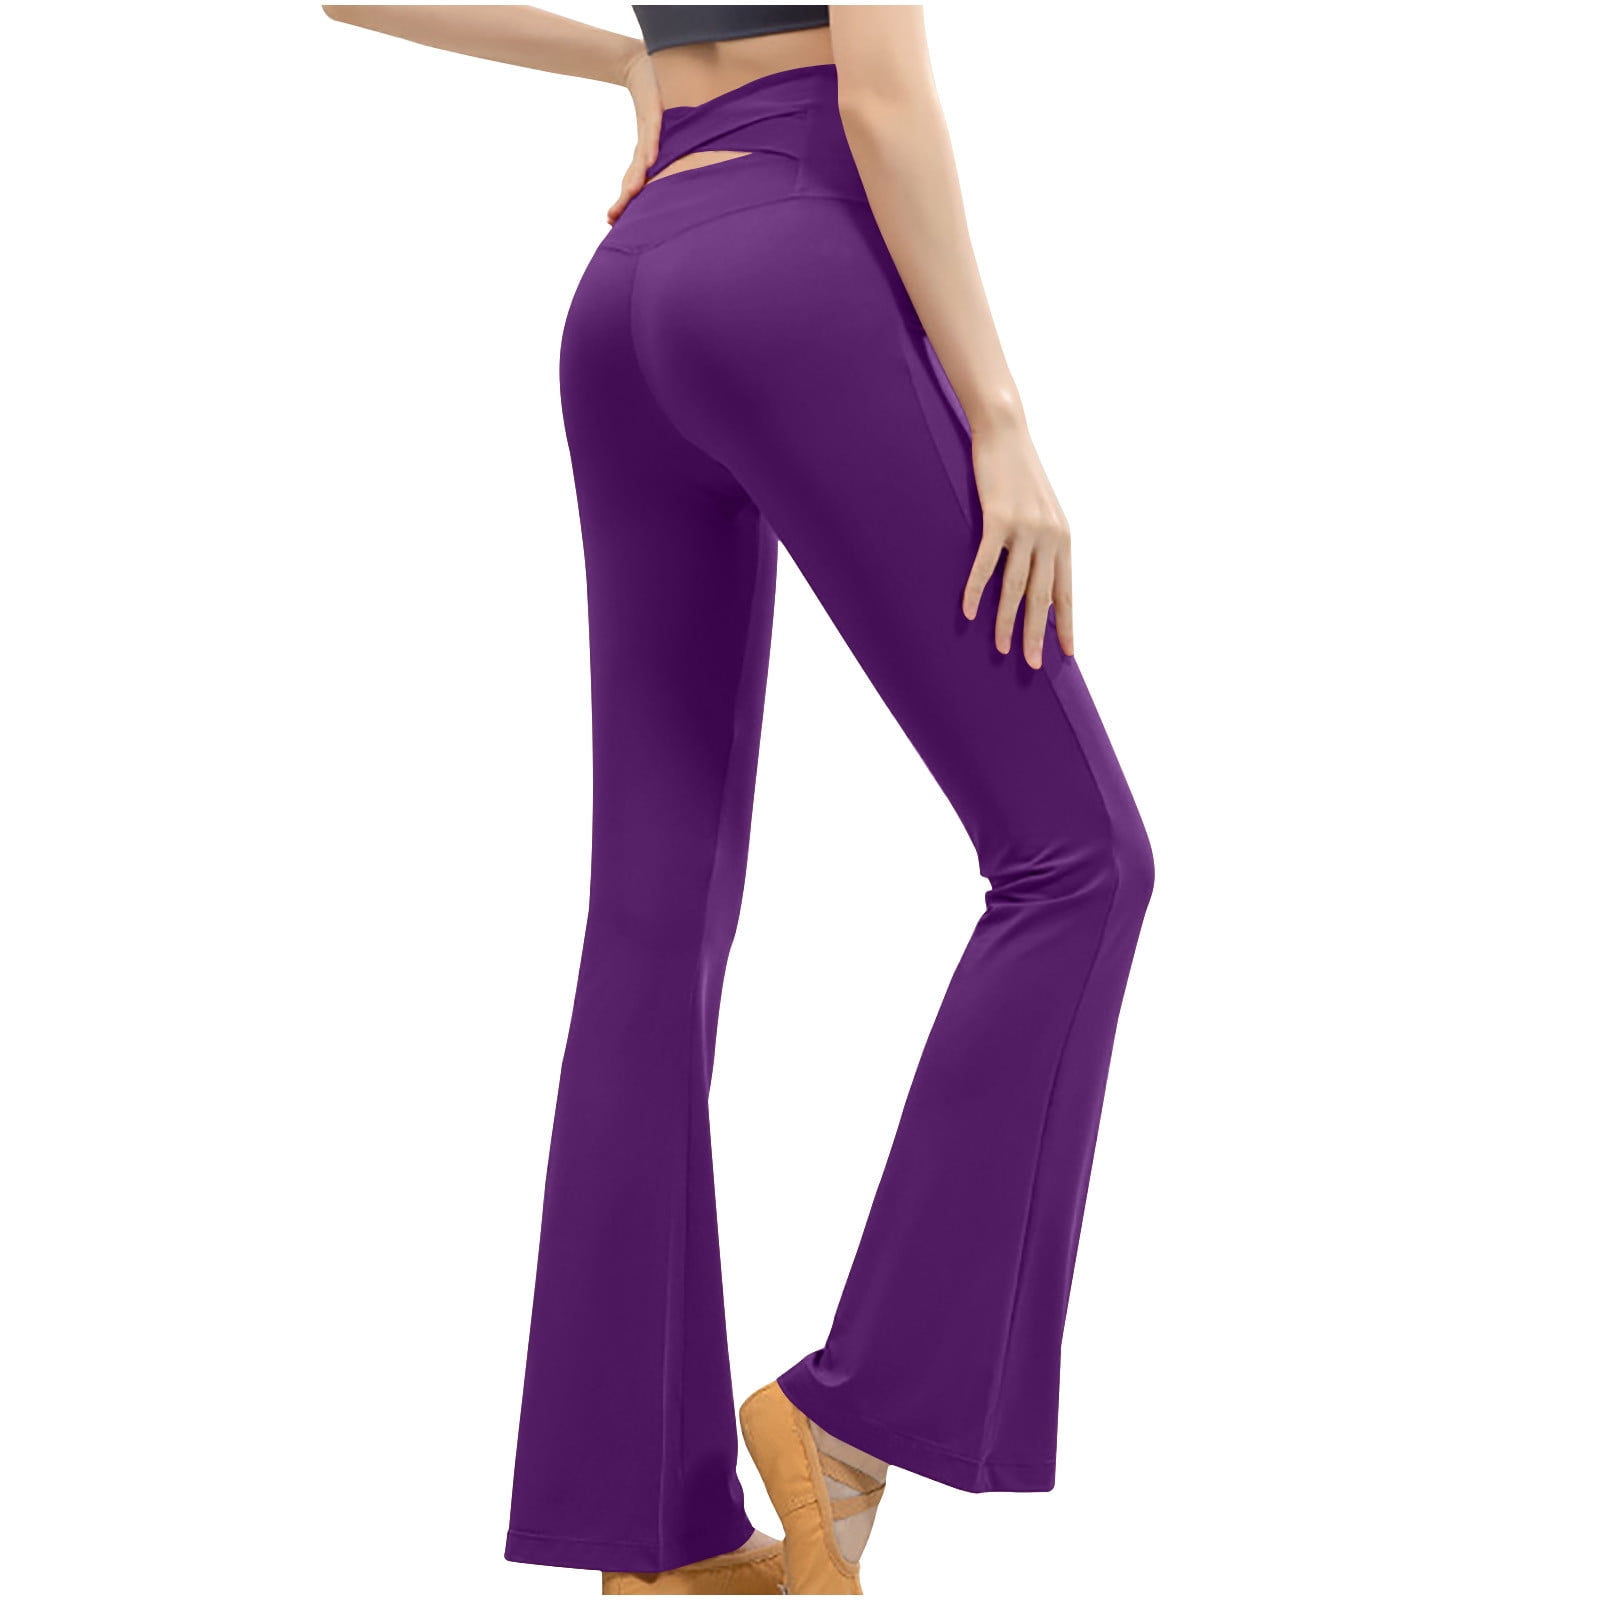 Purple High Waisted Ribbed Flare Pants  Purple pants outfit, Outfits with  leggings, Flared pants outfit